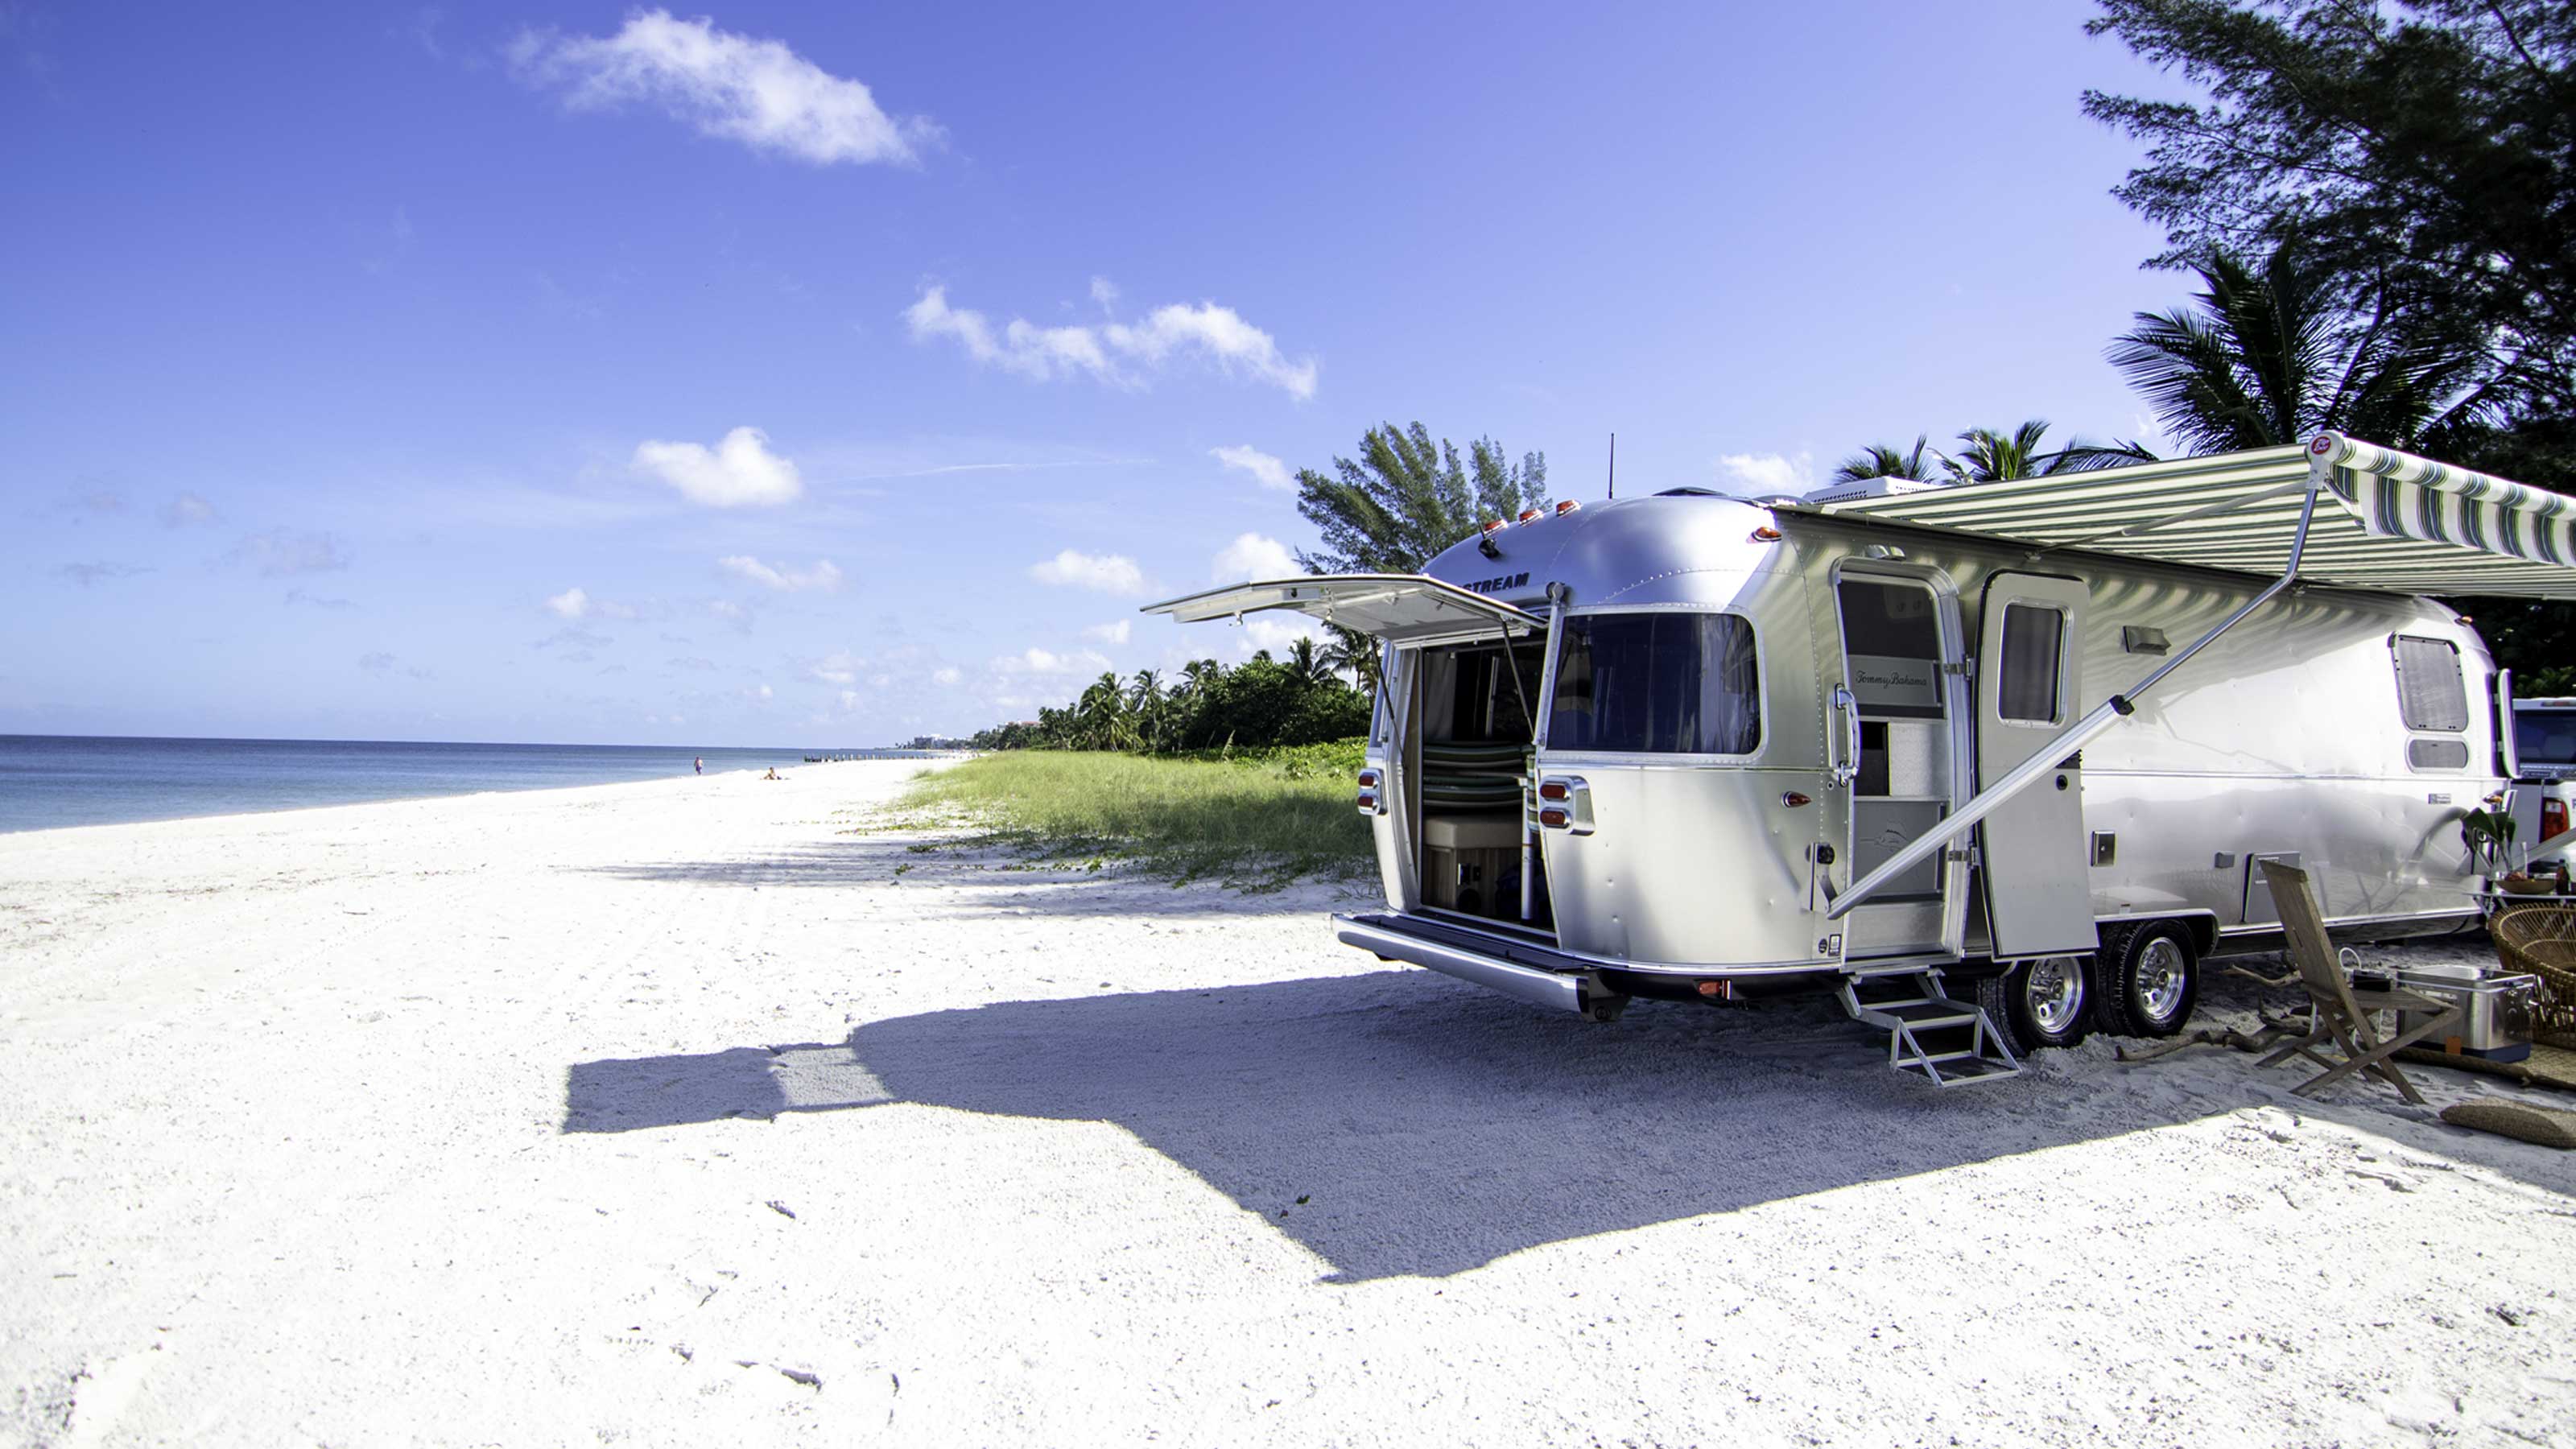 Live it up in paradise with a new North Trail RV